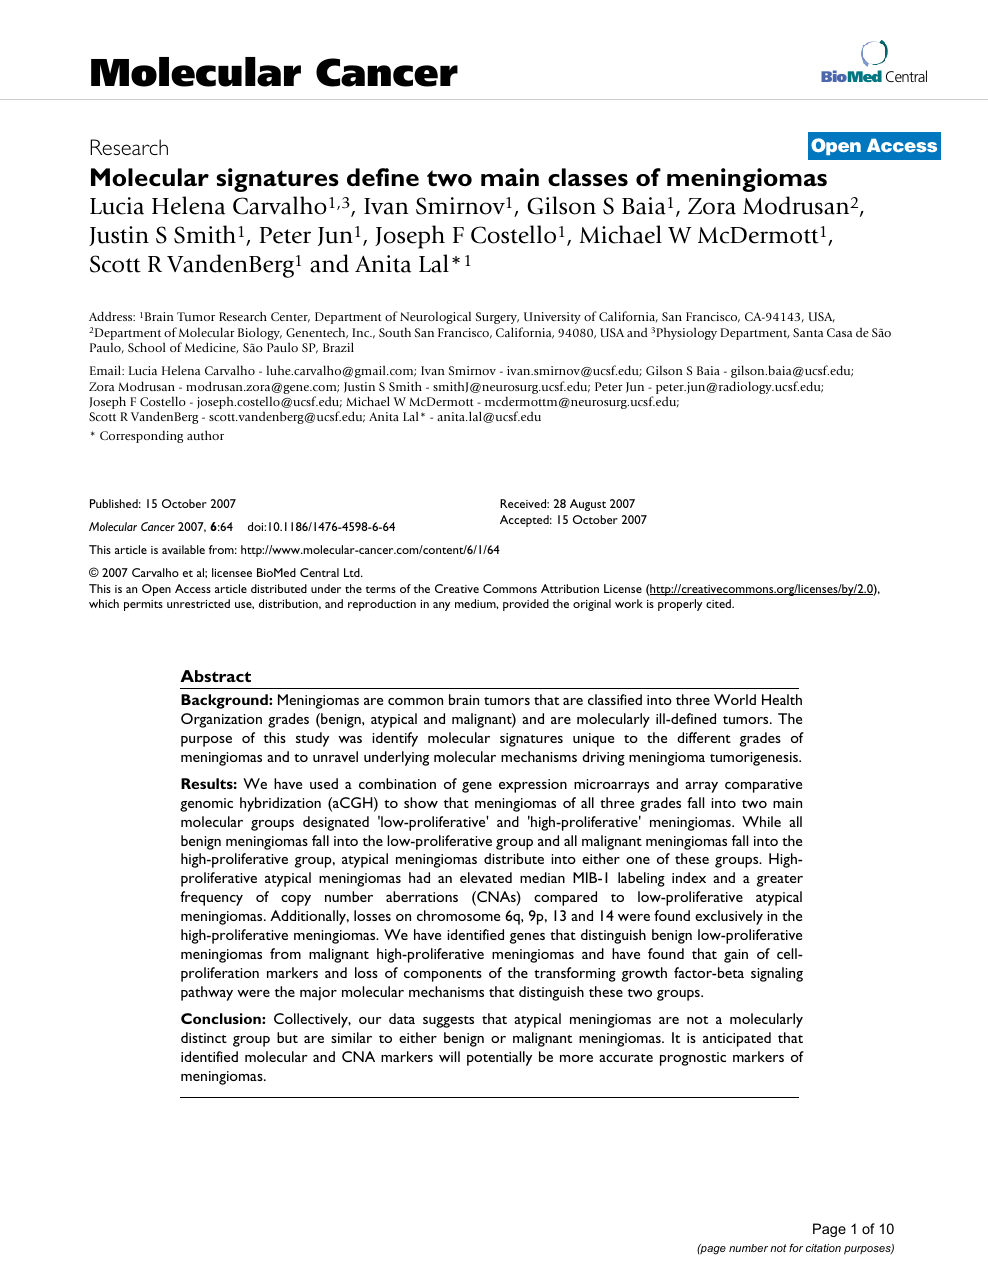 Molecular Signatures Define Two Main Classes Of Meningiomas Topic Of Research Paper In Clinical Medicine Download Scholarly Article Pdf And Read For Free On Cyberleninka Open Science Hub